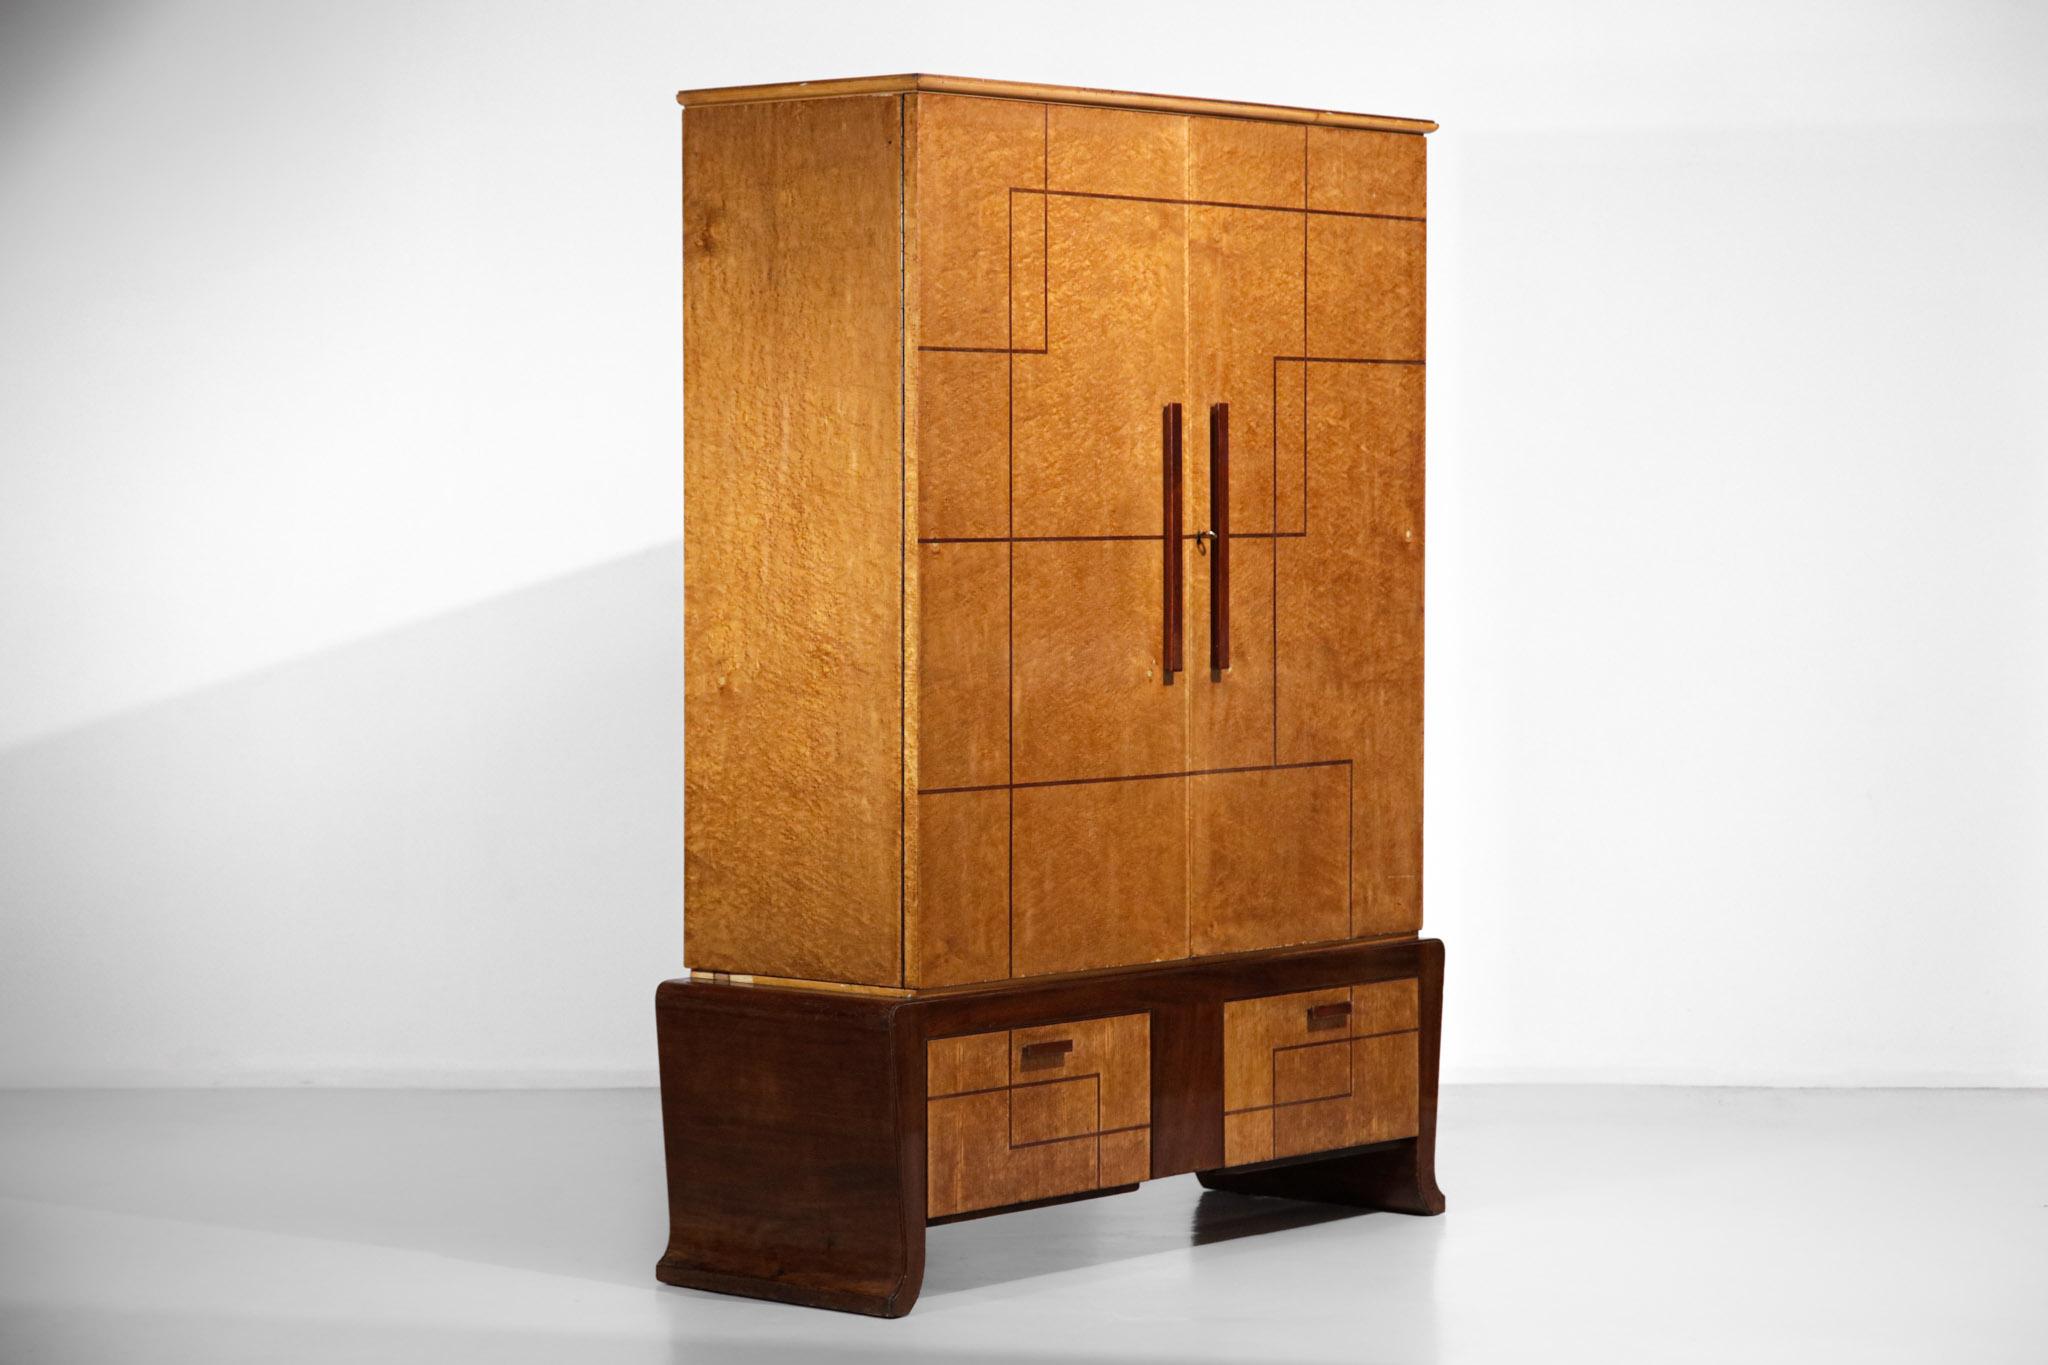 Italian Wardrobe Duo from the 50s/60s in the Style of Gio Ponti - F266 9